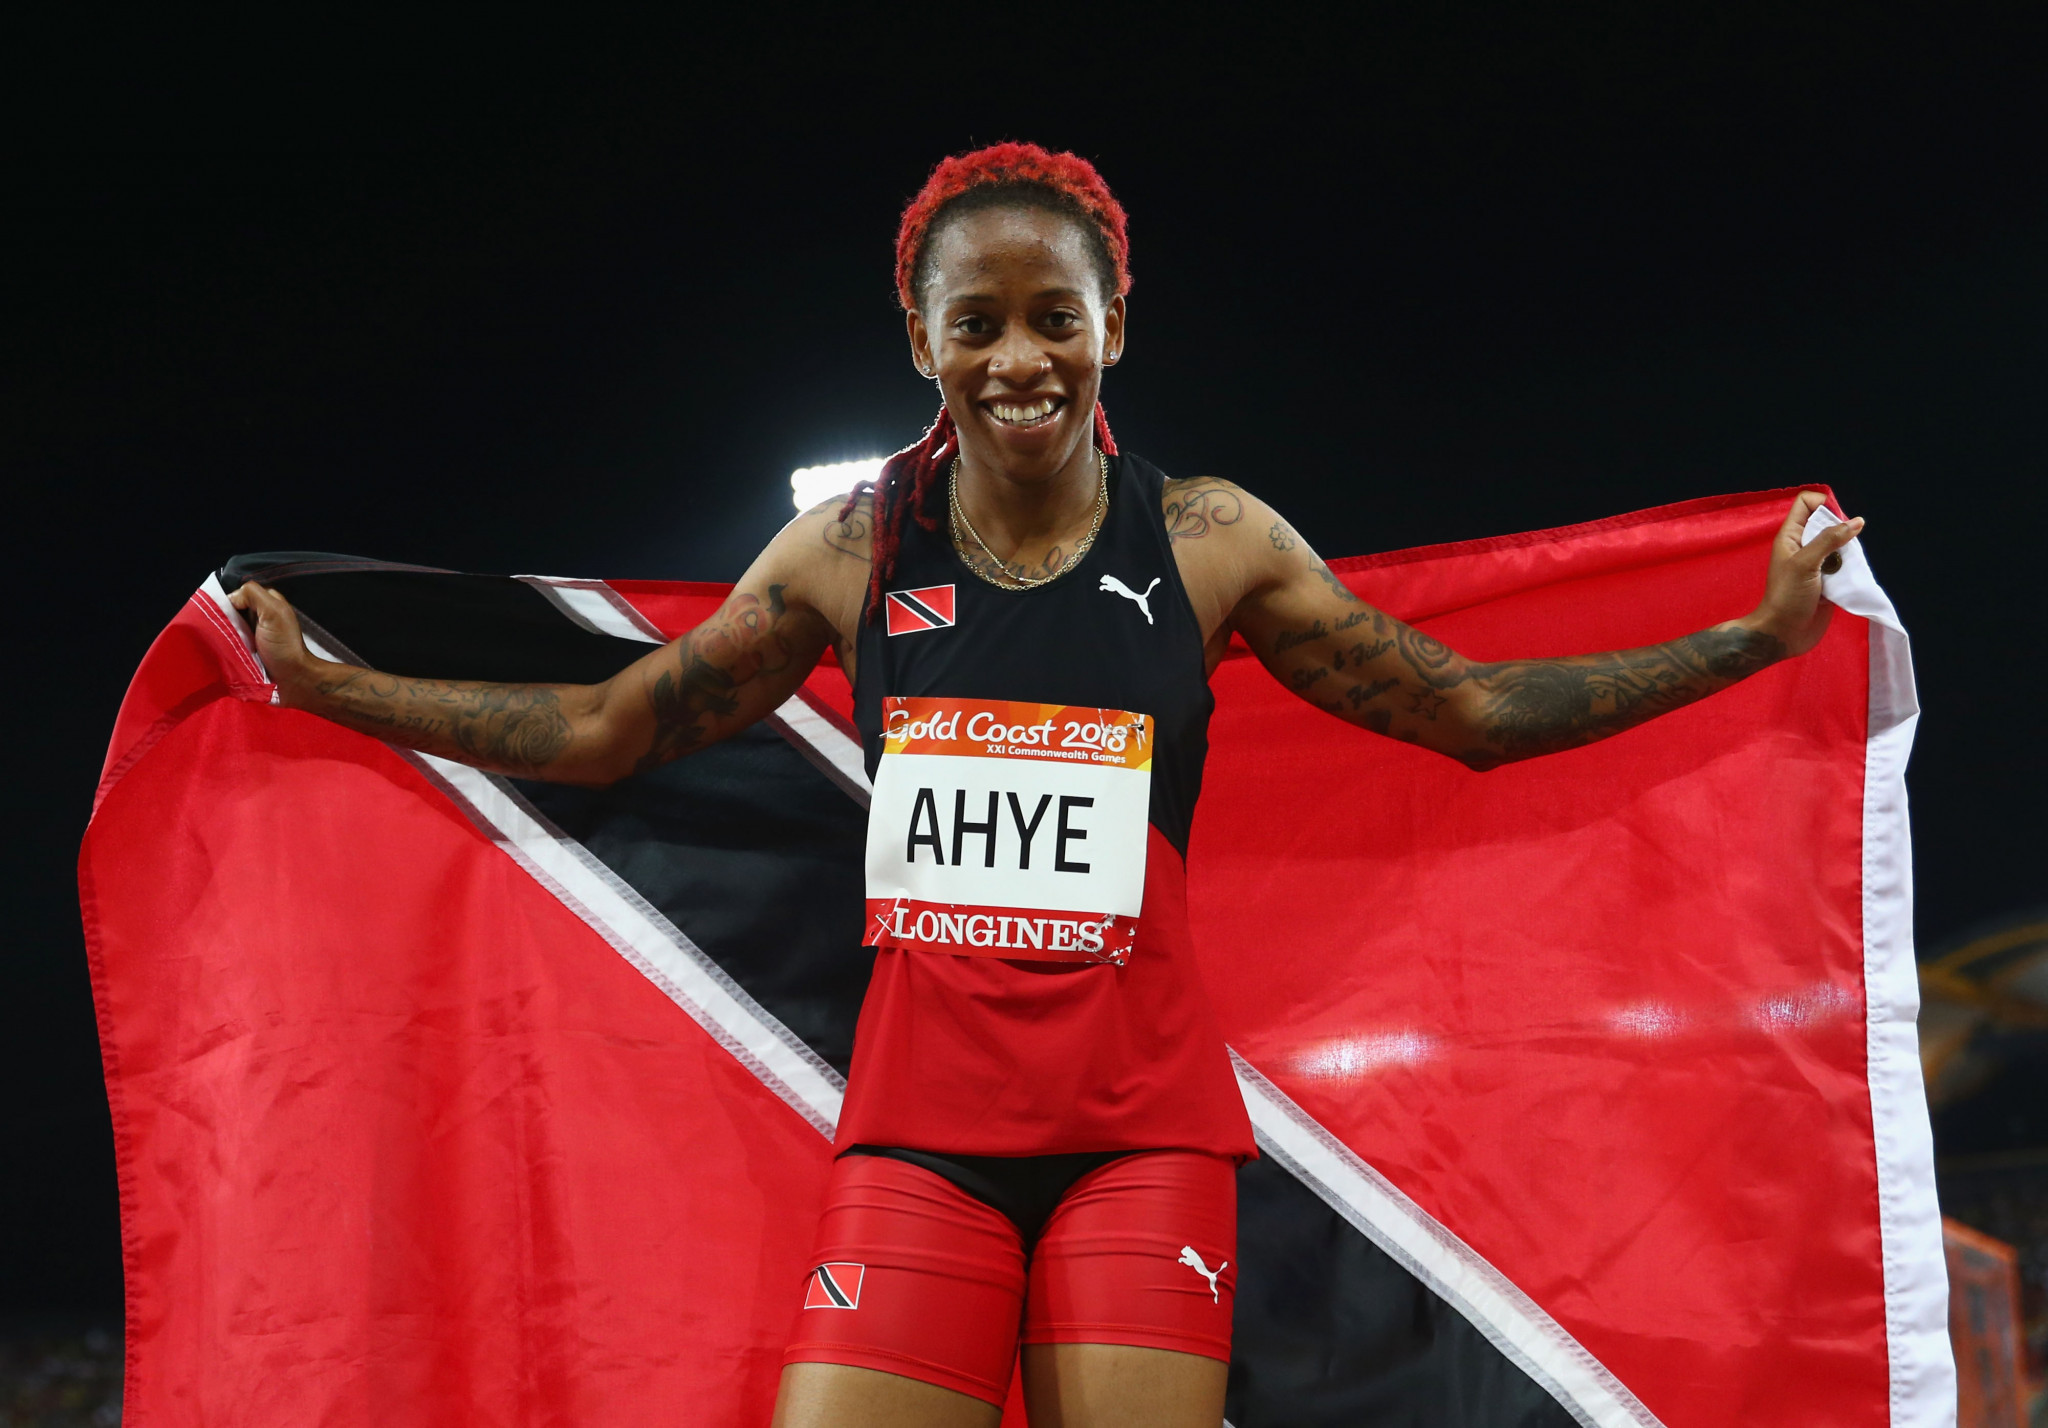 Commonwealth Games 100m champion Ahye to miss Tokyo 2020 after whereabouts failures